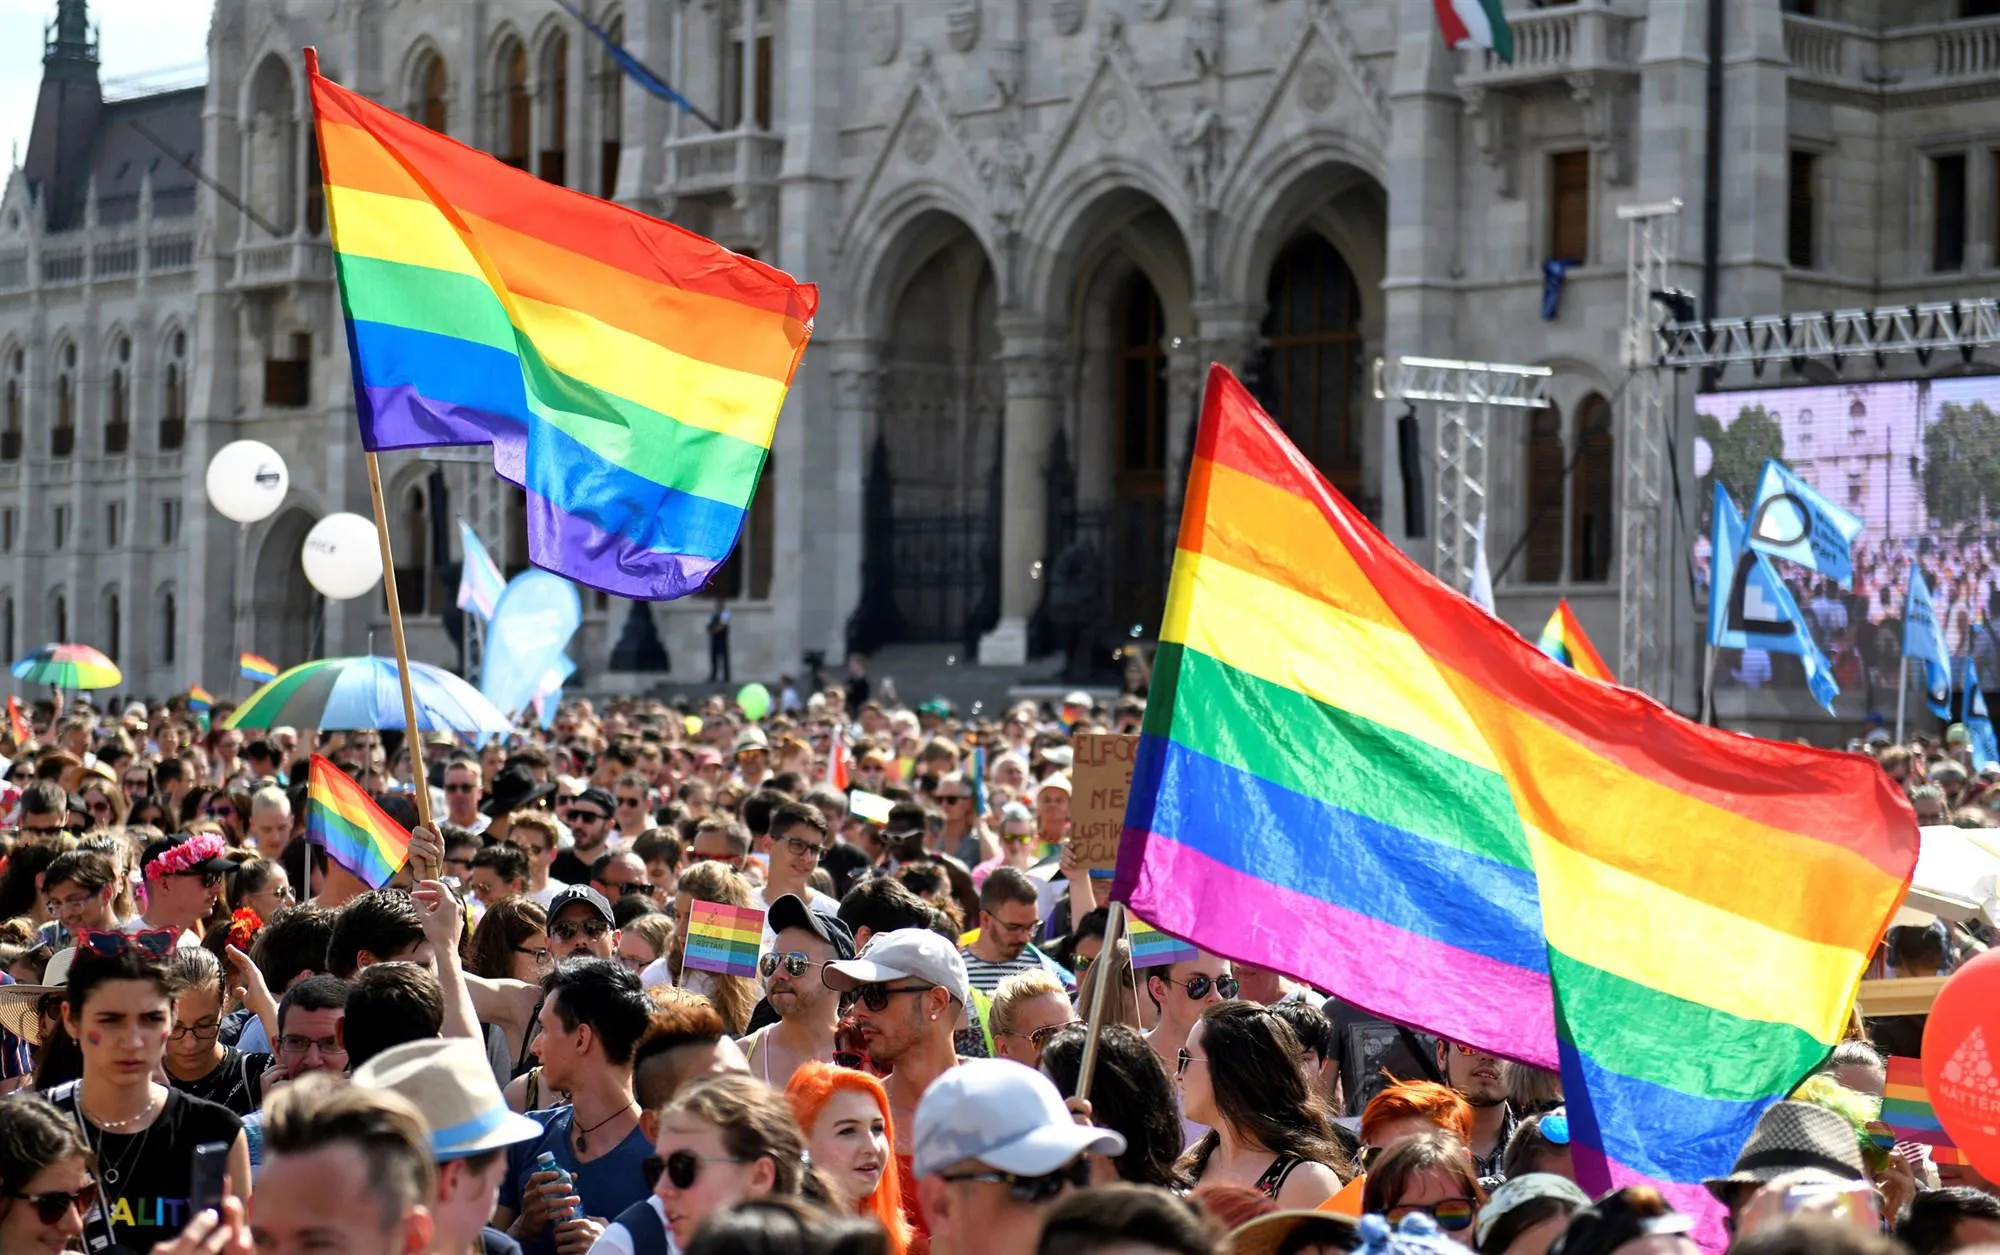 People take part in the annual Pride festival in Budapest, Hungary